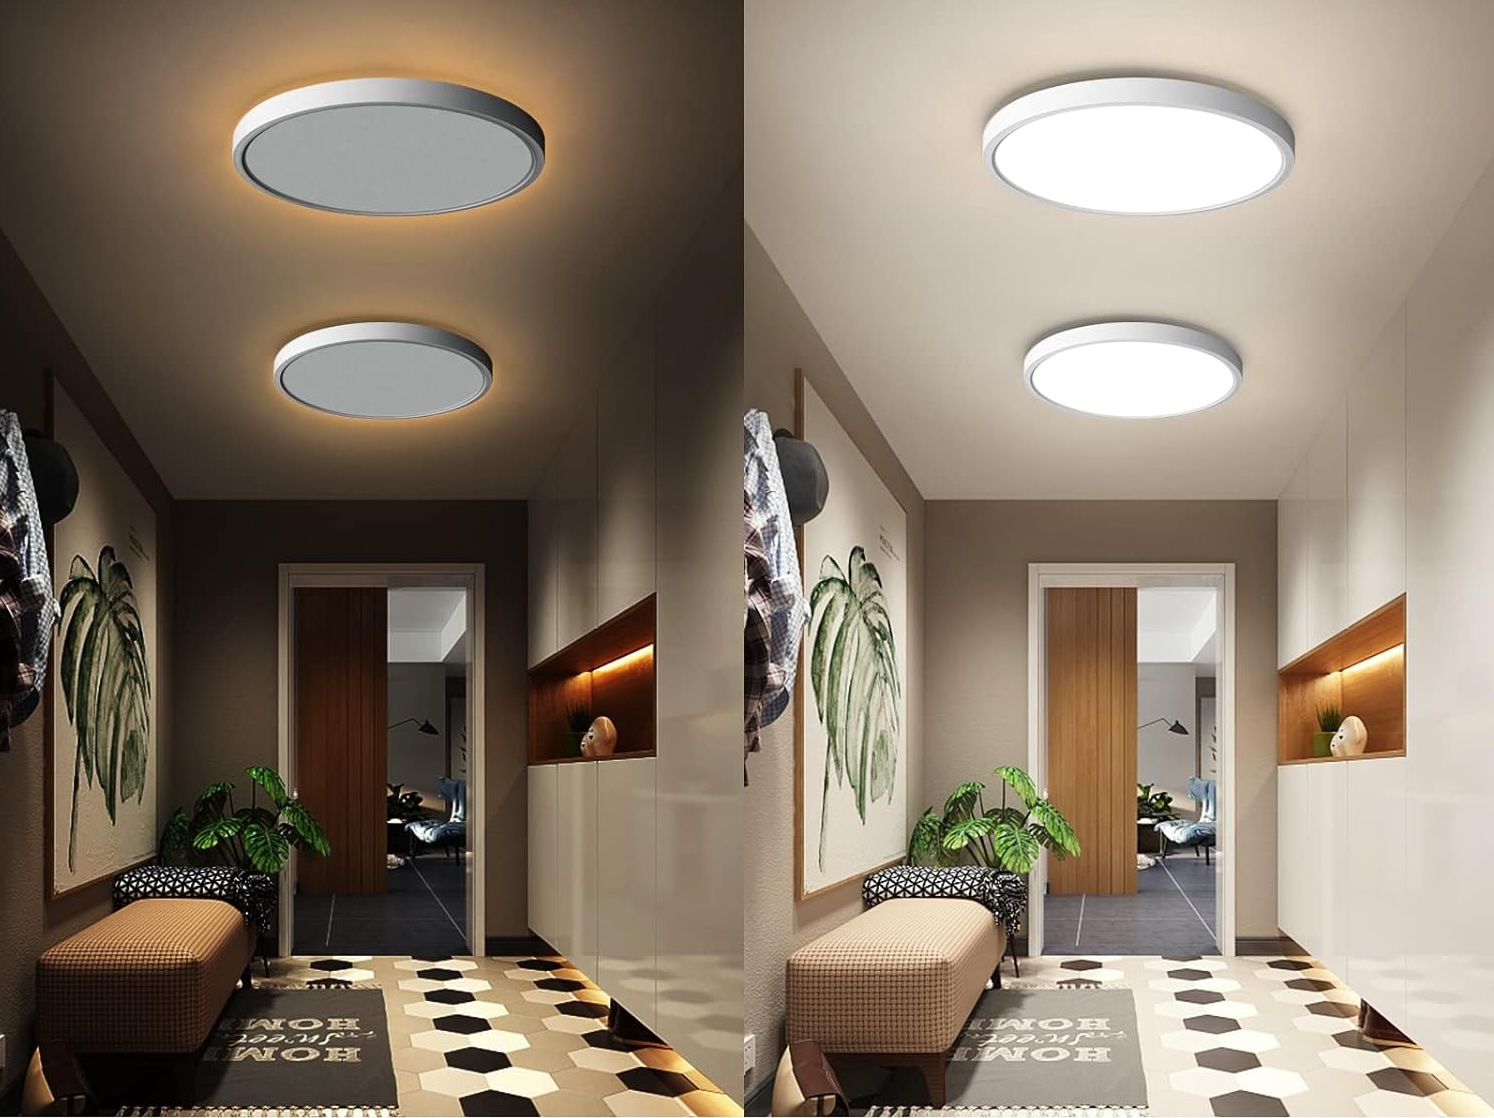 Skyline Glow: Surface Mount Ceiling Lights That Redefine Spaces